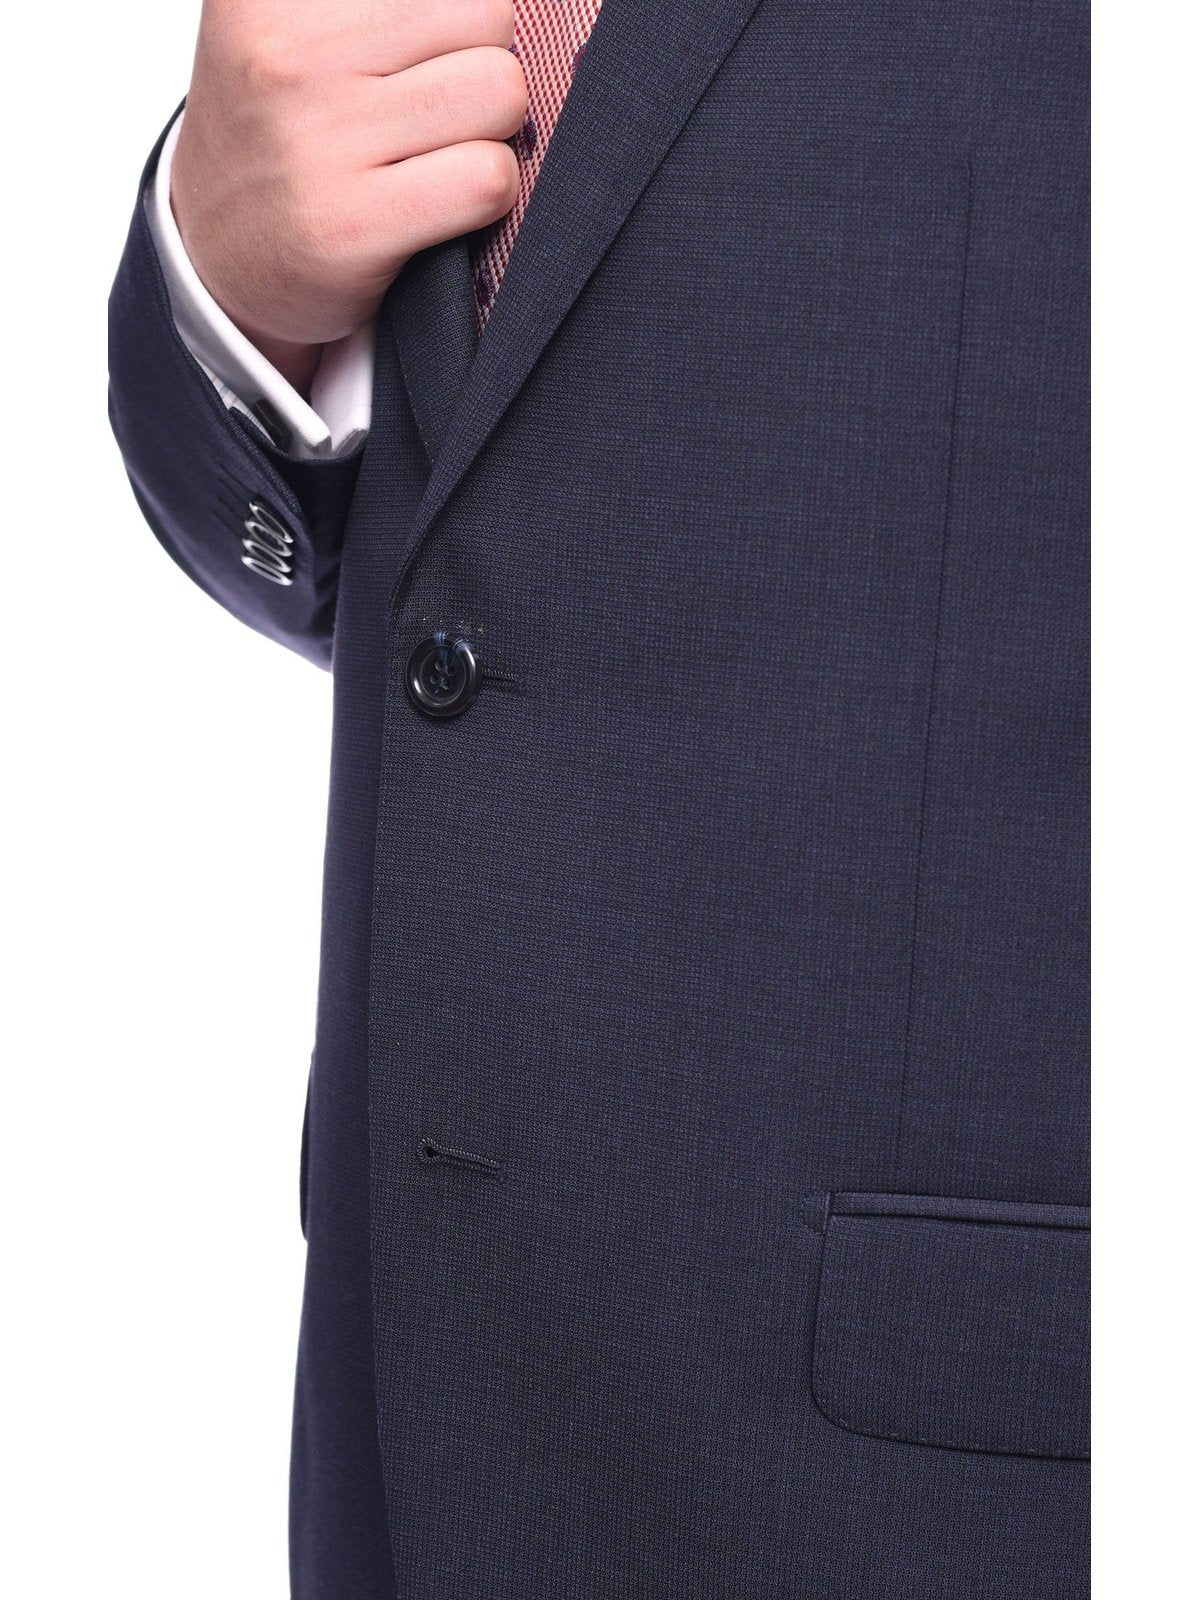 Napoli TWO PIECE SUITS Napoli Classic Fit Navy Blue Textured Two Button Half Canvassed Reda Wool Suit